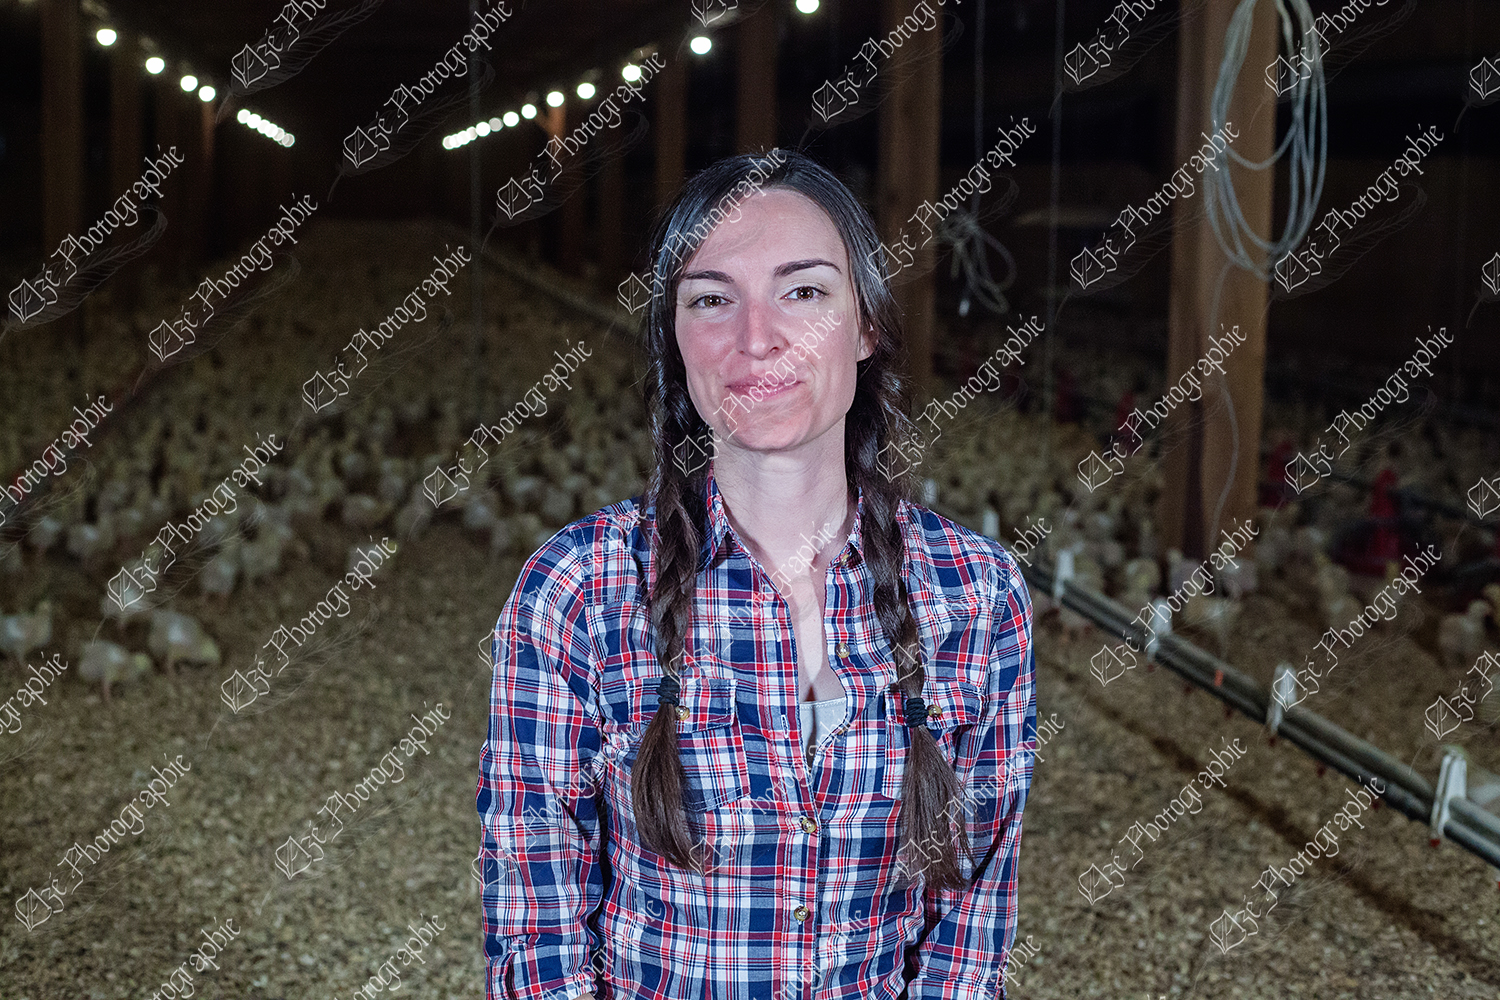 elze_photo_9022_poussins_agricultrice_batiment_chicken_coop_woman